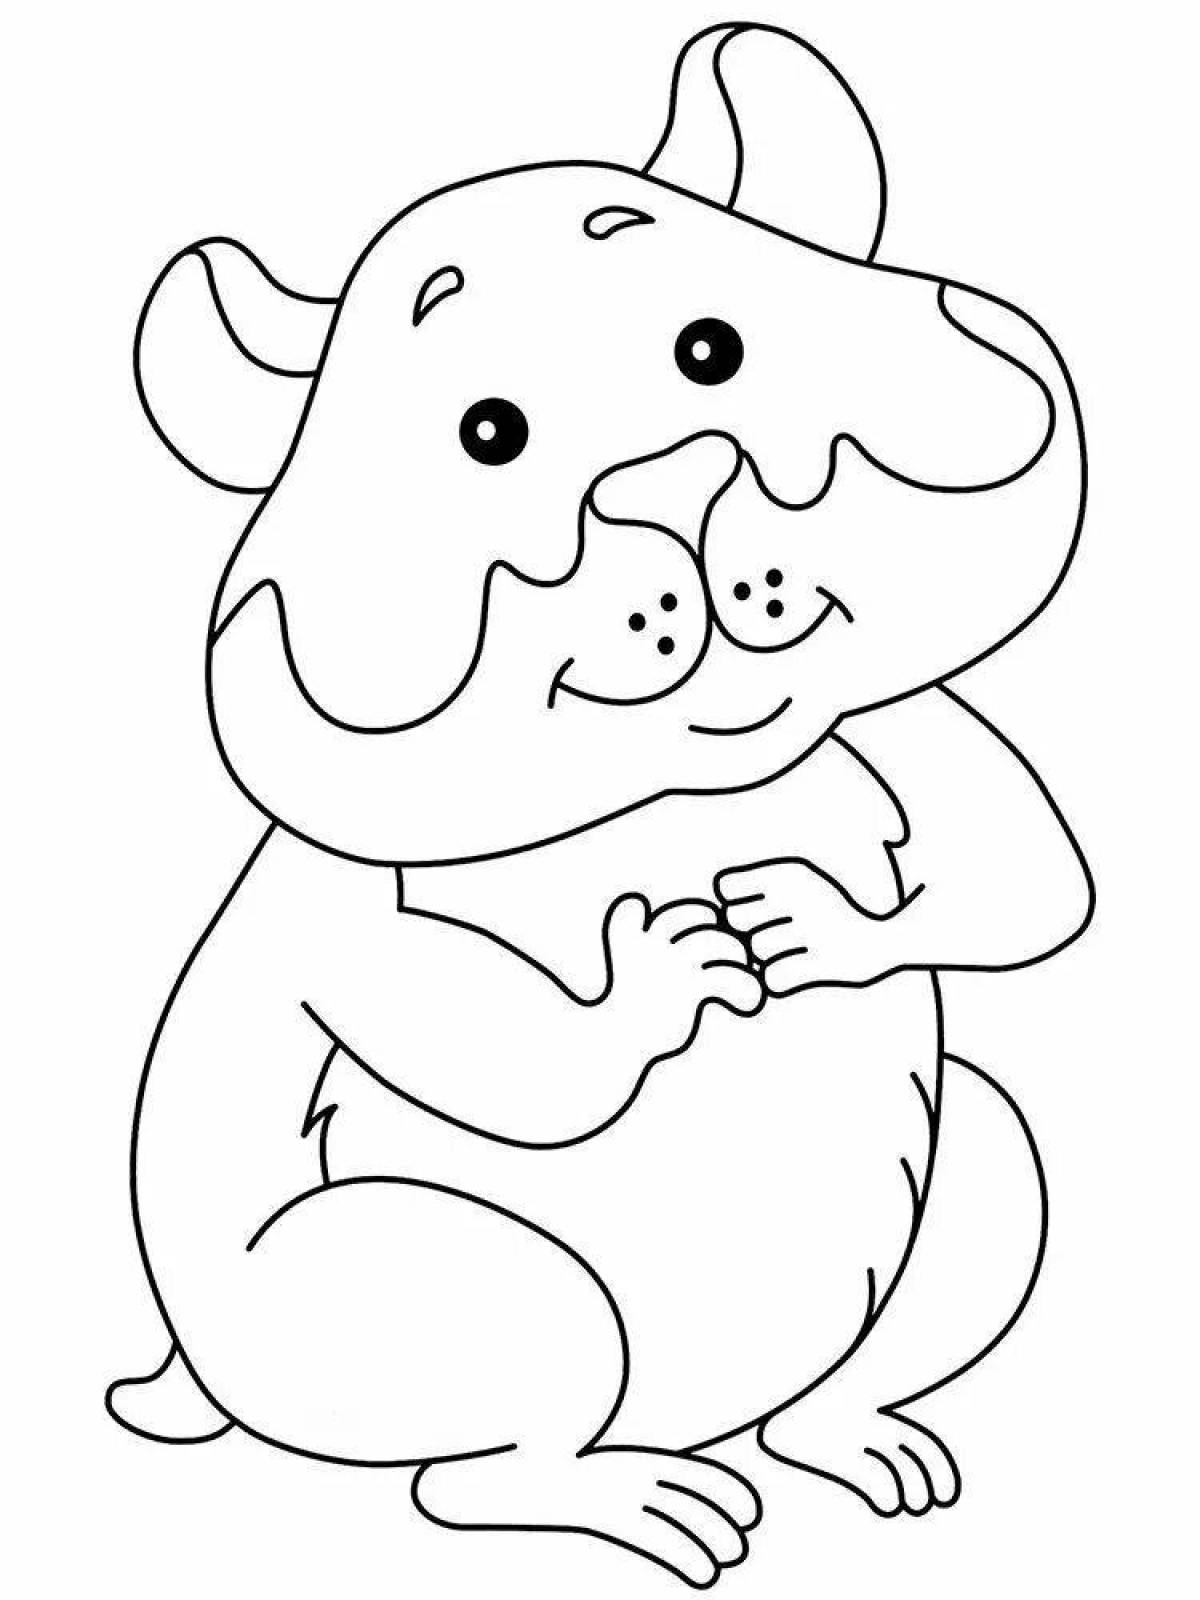 Cute hamster coloring pages for kids